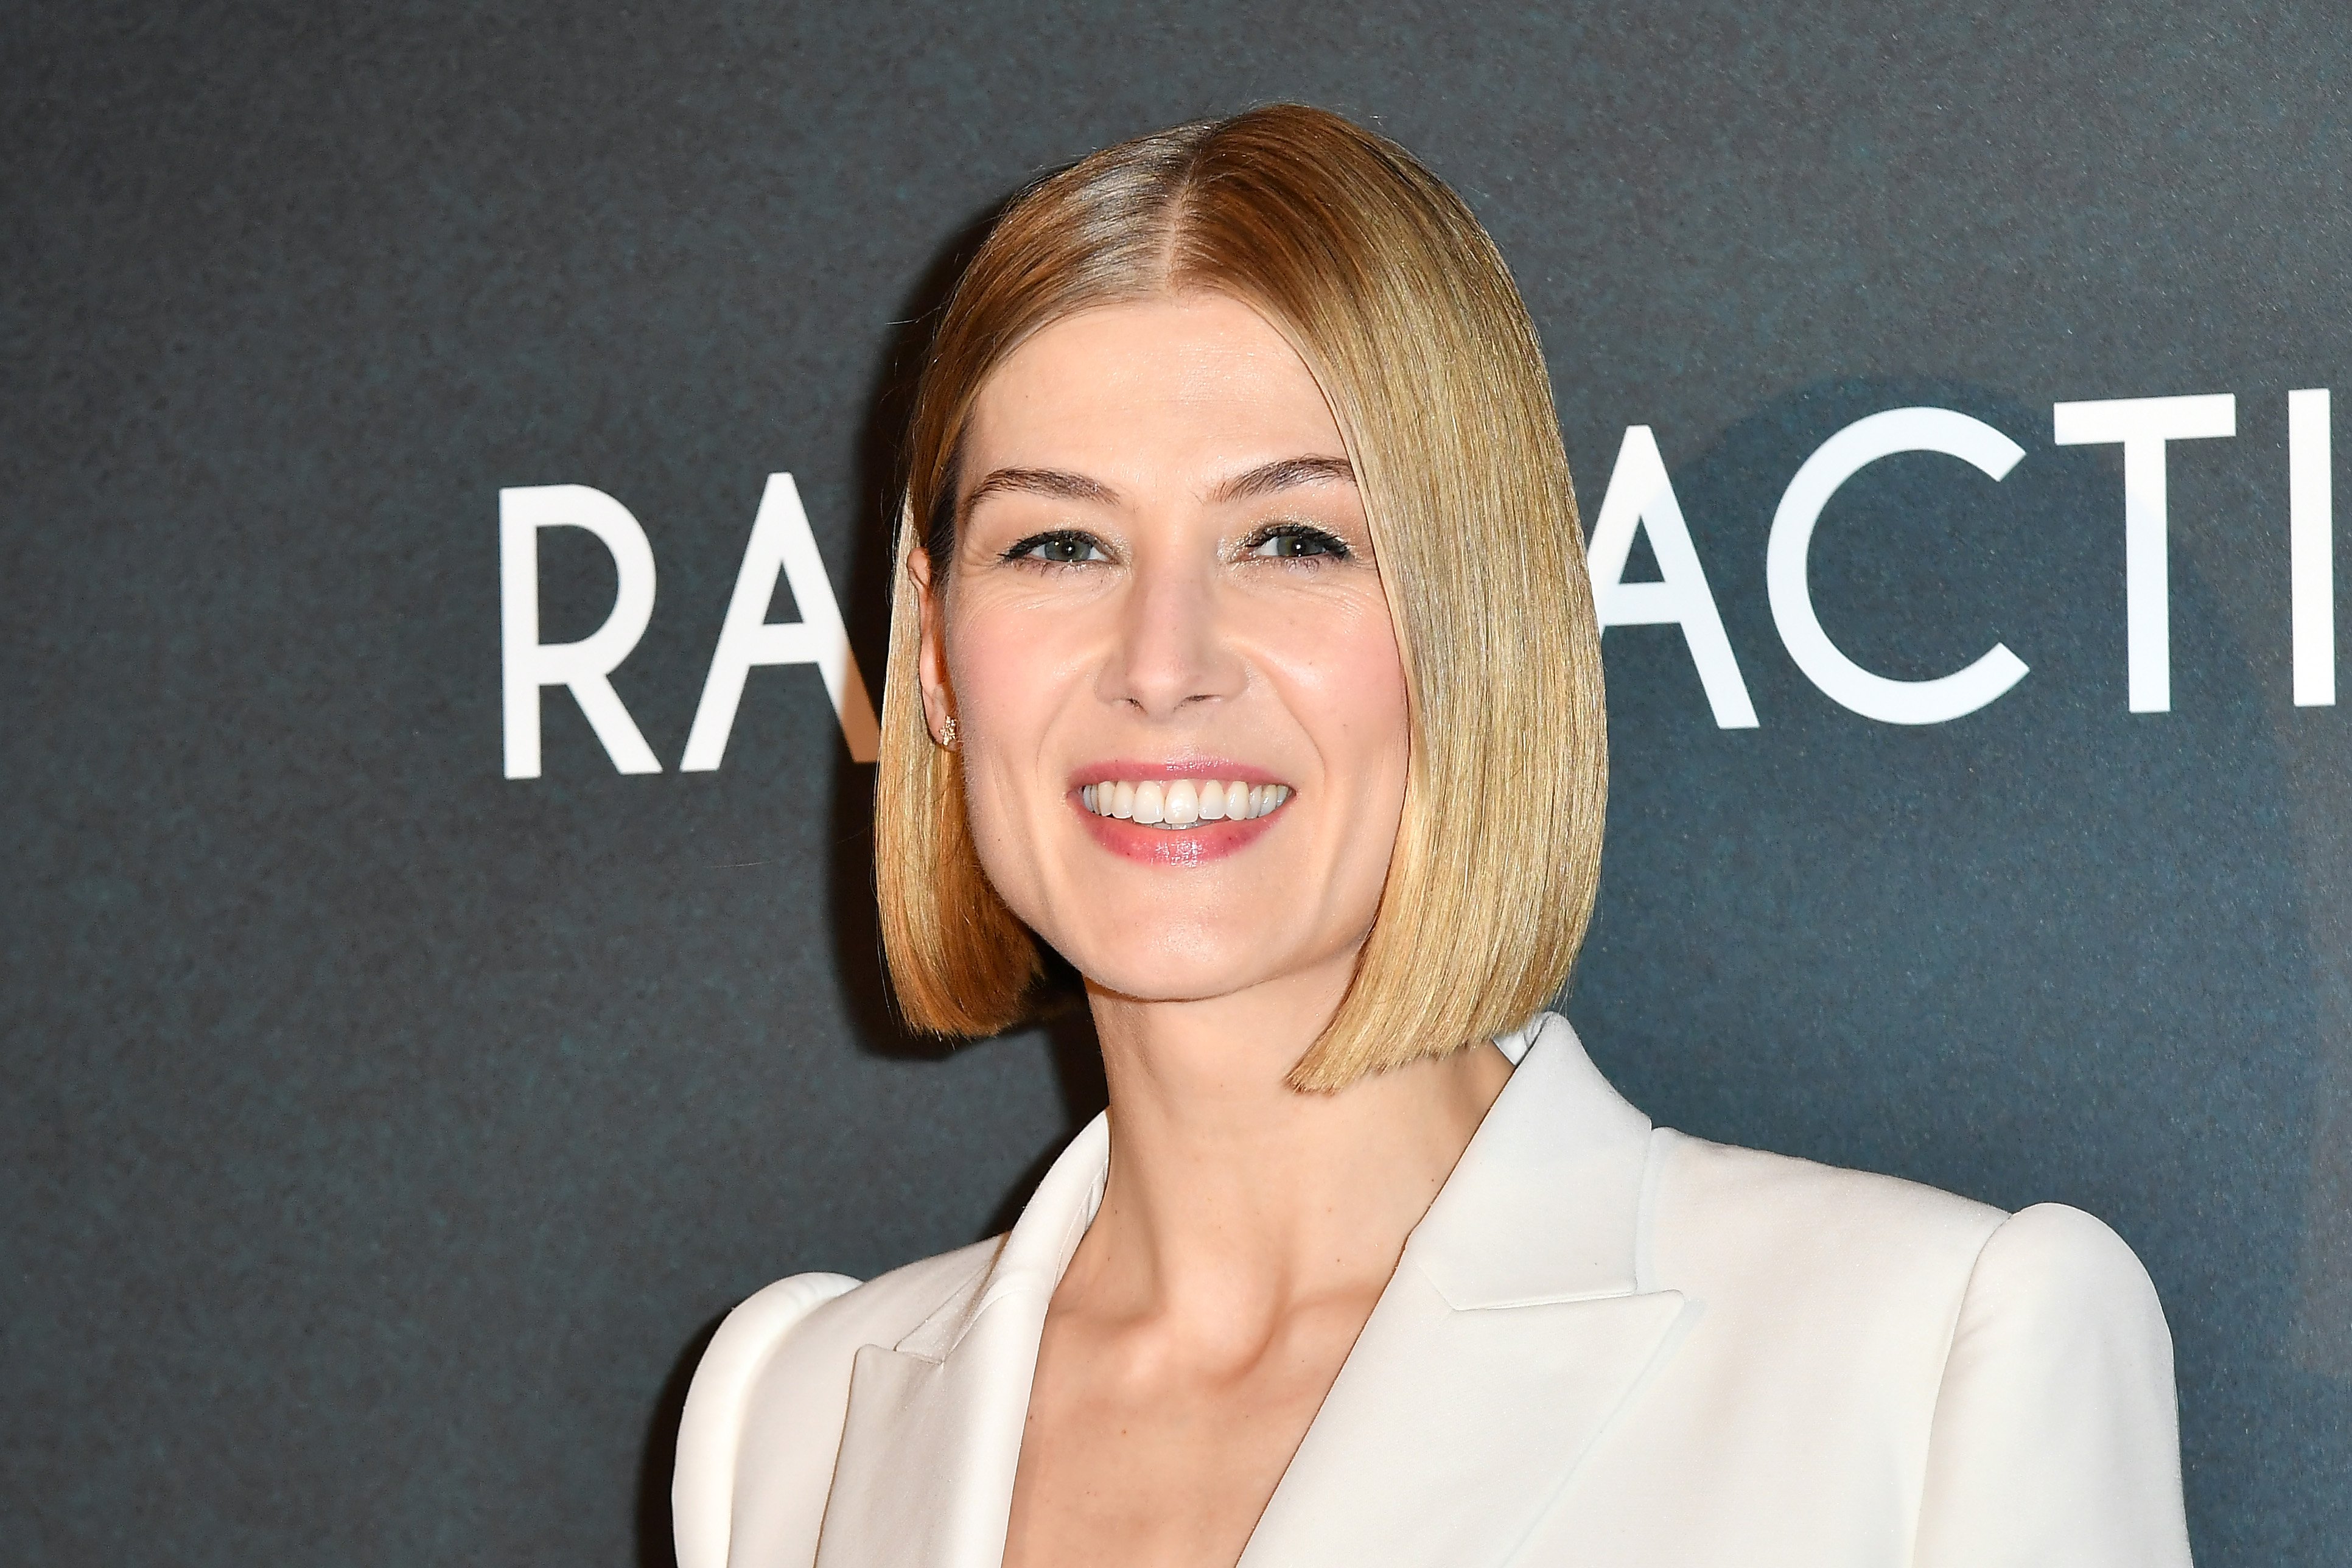 Rosamund Pike attends the 'Radioactive' premiere.